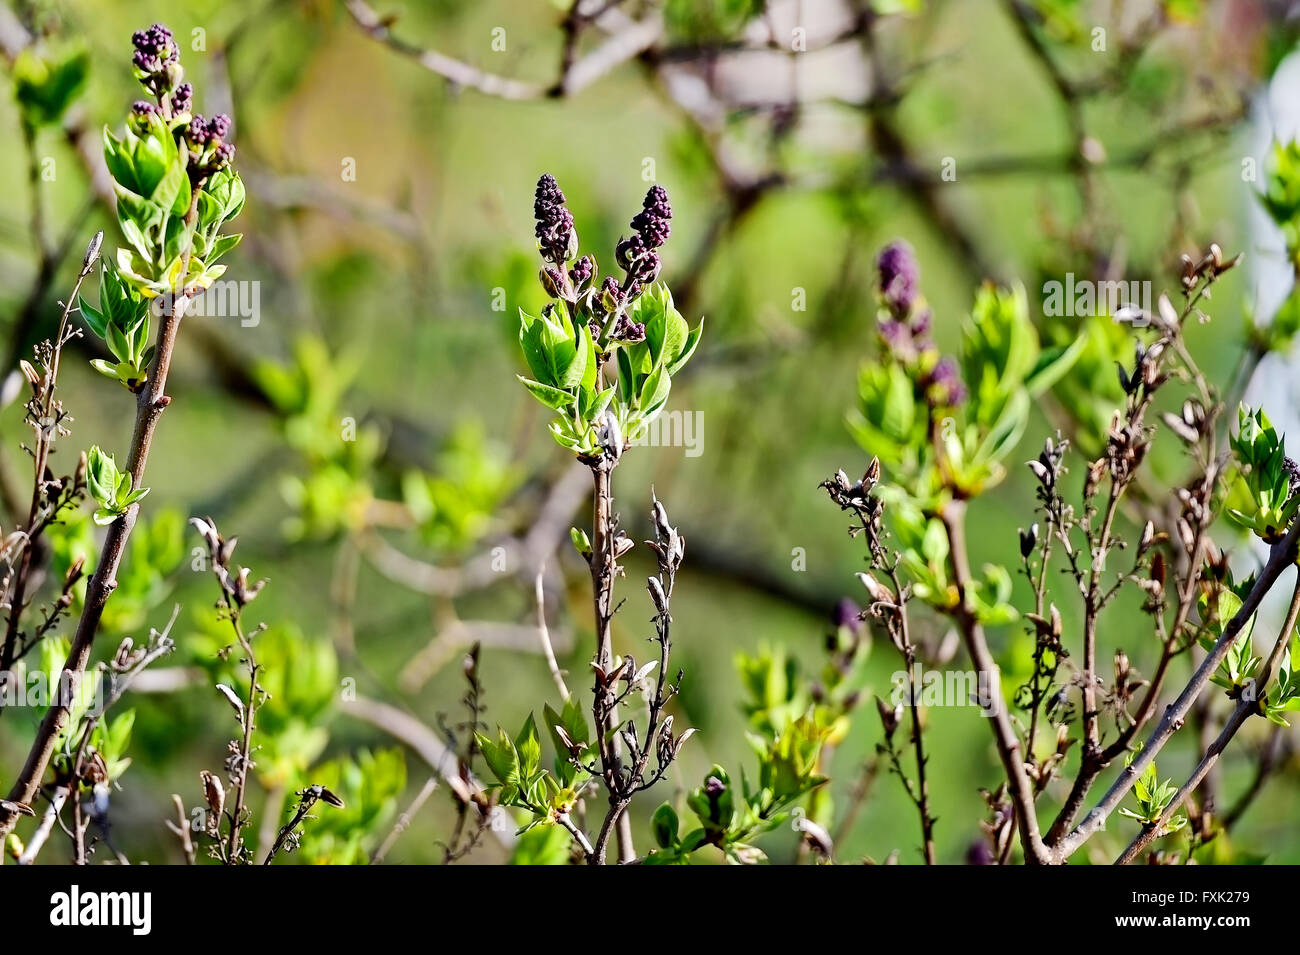 Small lilac flowers blooming on lilac tree branch in early springtime Stock Photo